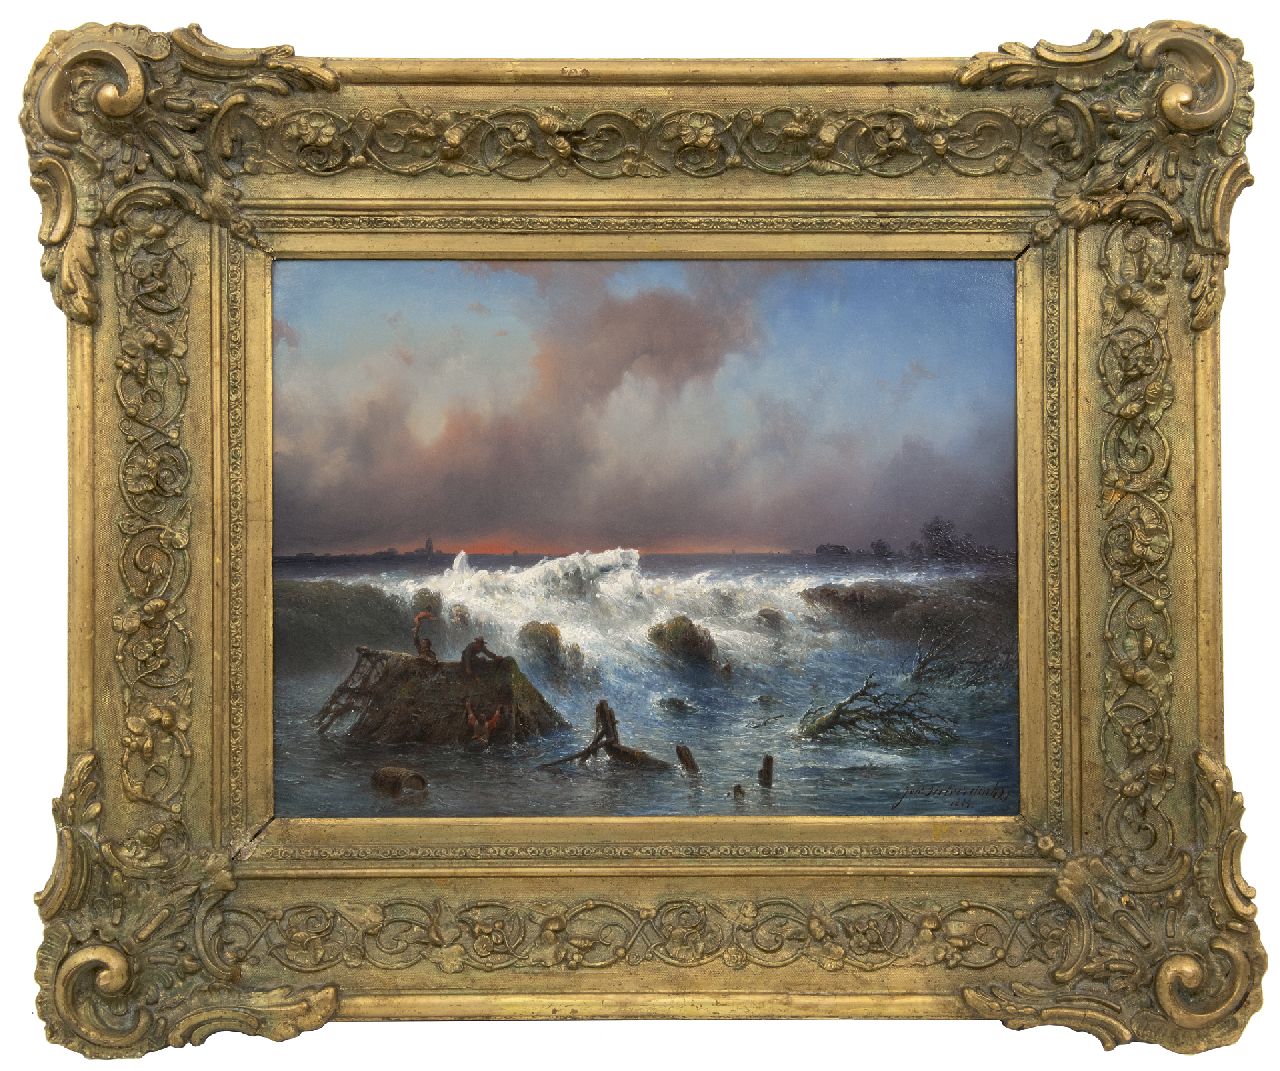 Hilverdink J.  | Johannes Hilverdink | Paintings offered for sale | The rupture of the 'Grebbedijk' on March 5th 1855, oil on panel 37.1 x 50.1 cm, signed l.r. and dated 1855